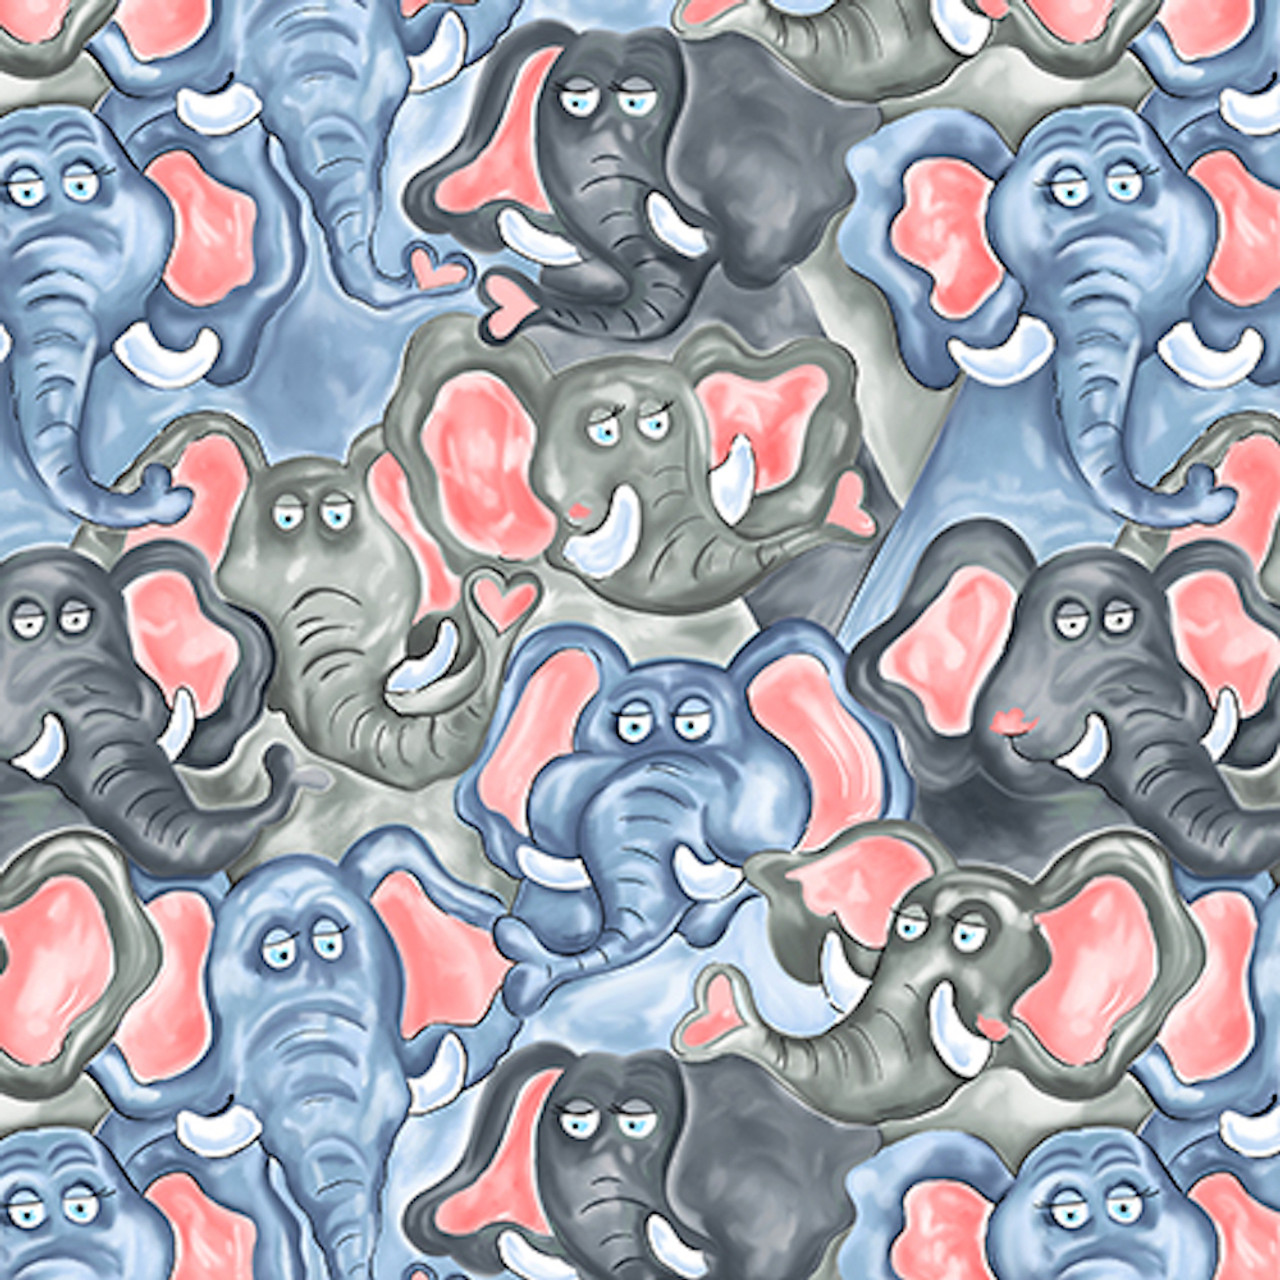 Blank Quilting Jungle Buddies Elephants Lt Gray Cotton Quilting Fabric By The Yard